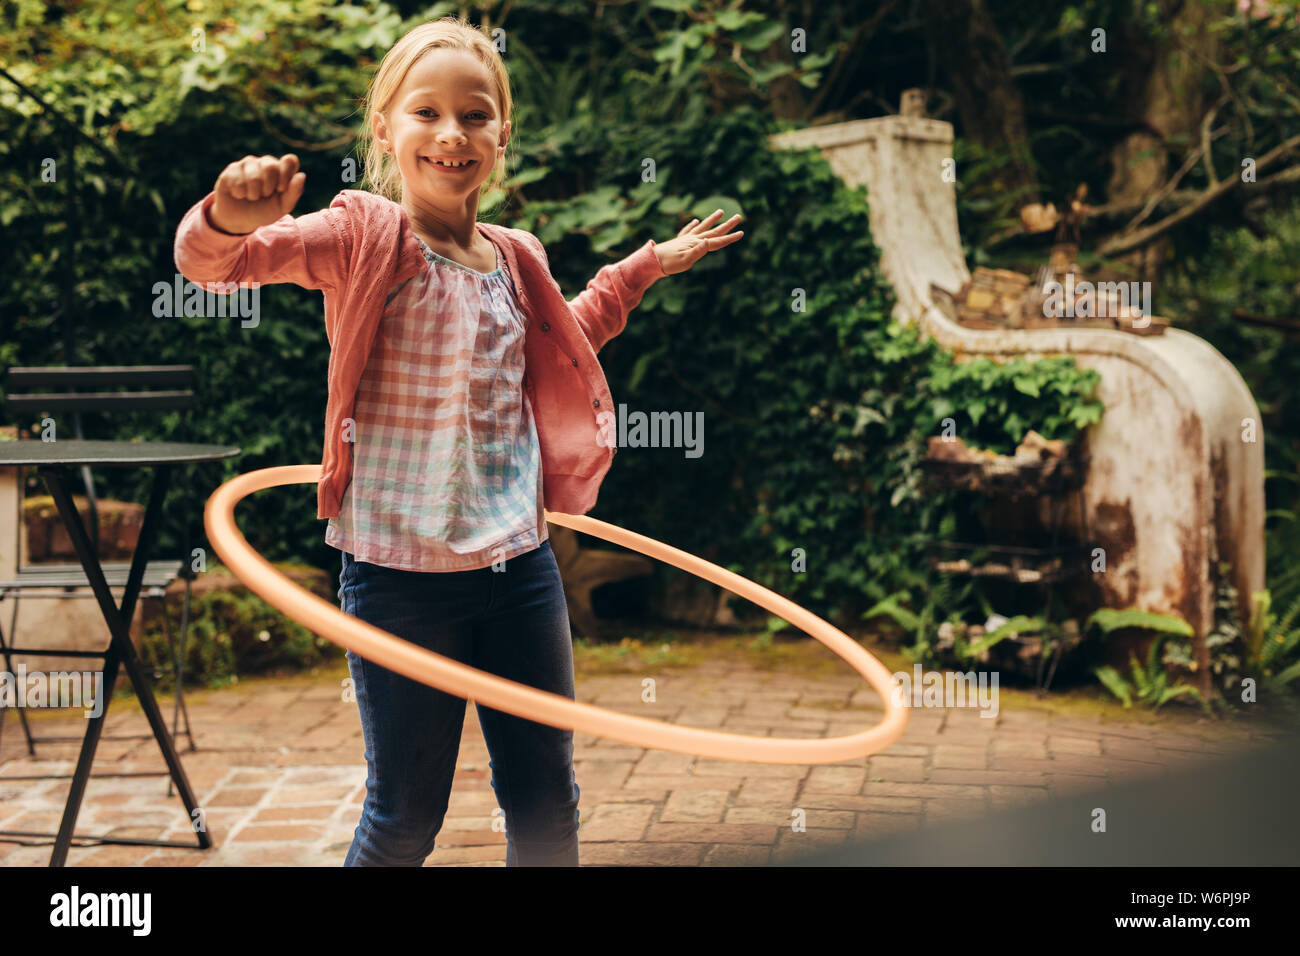 Smiling kid playing with a hula hoop in her backyard. Girl having fun  turning a hoopla ring around her waist Stock Photo - Alamy